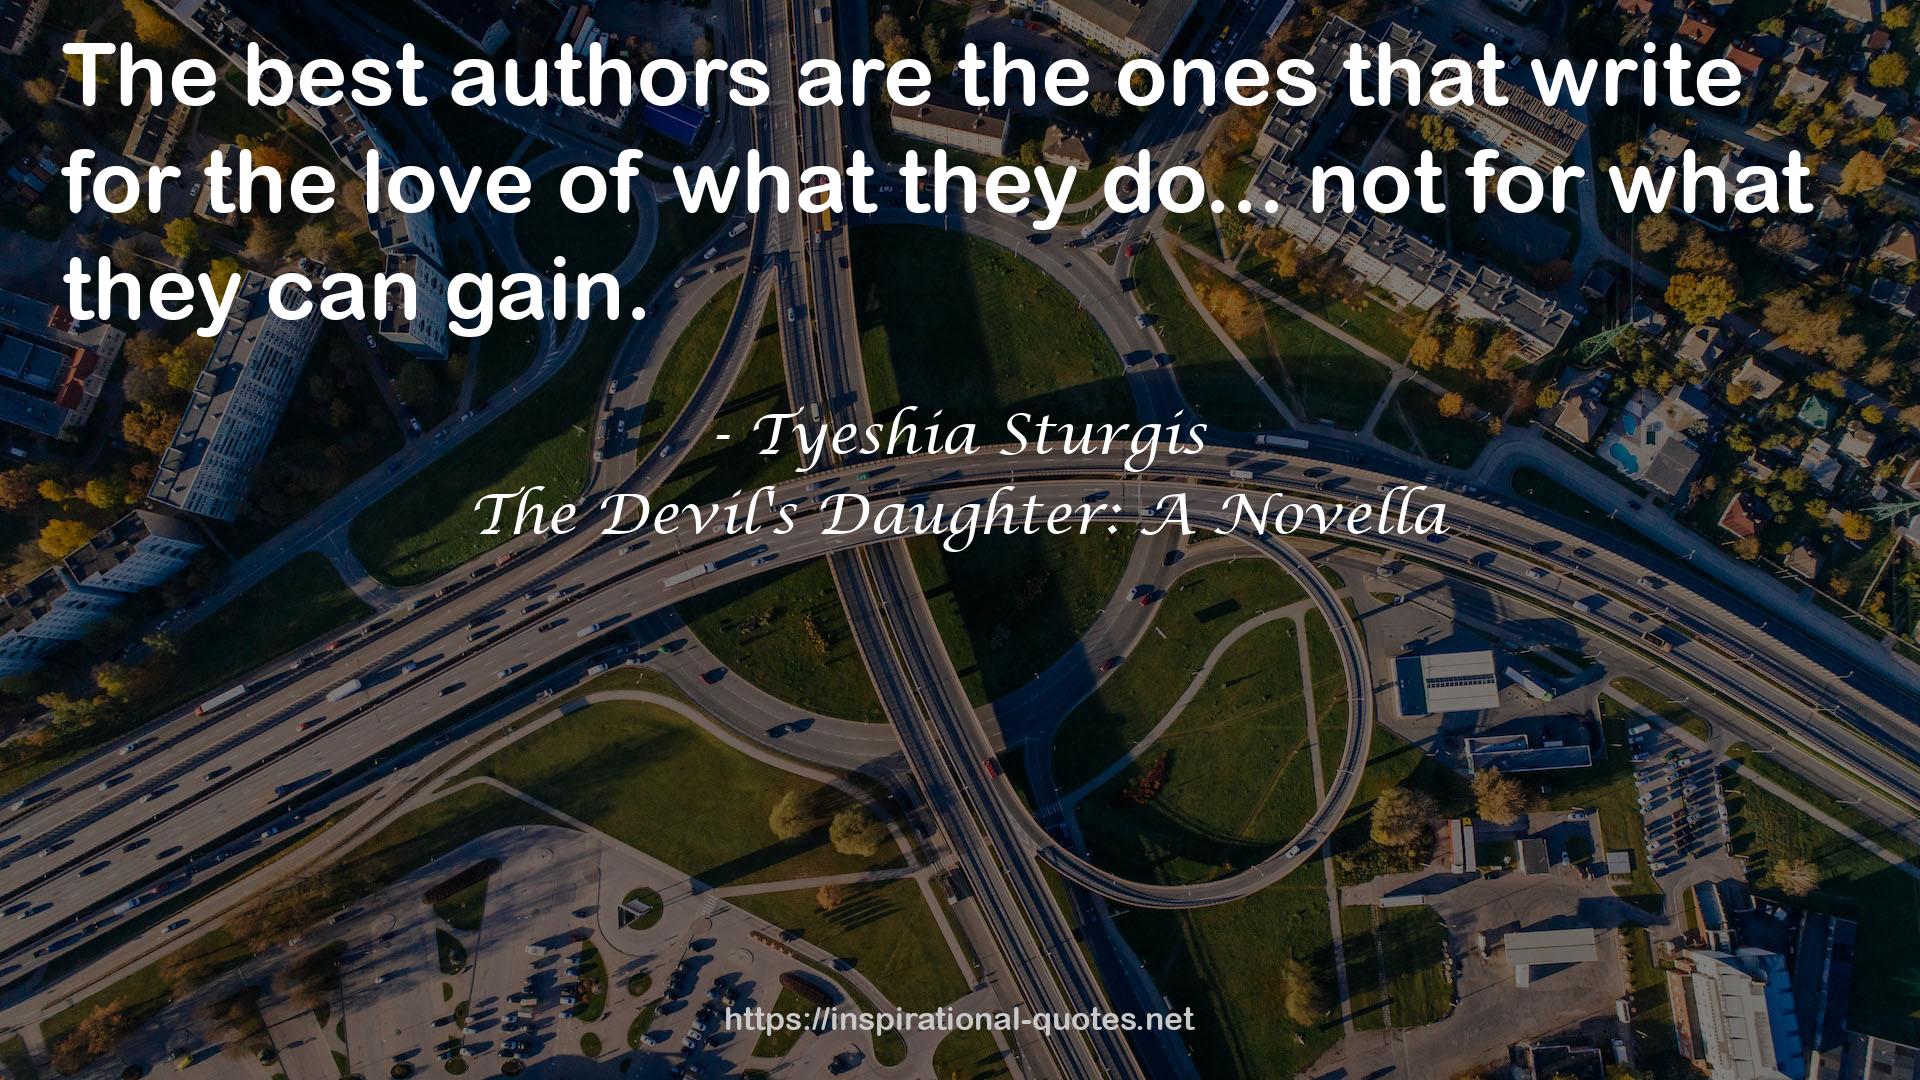 The Devil's Daughter: A Novella QUOTES